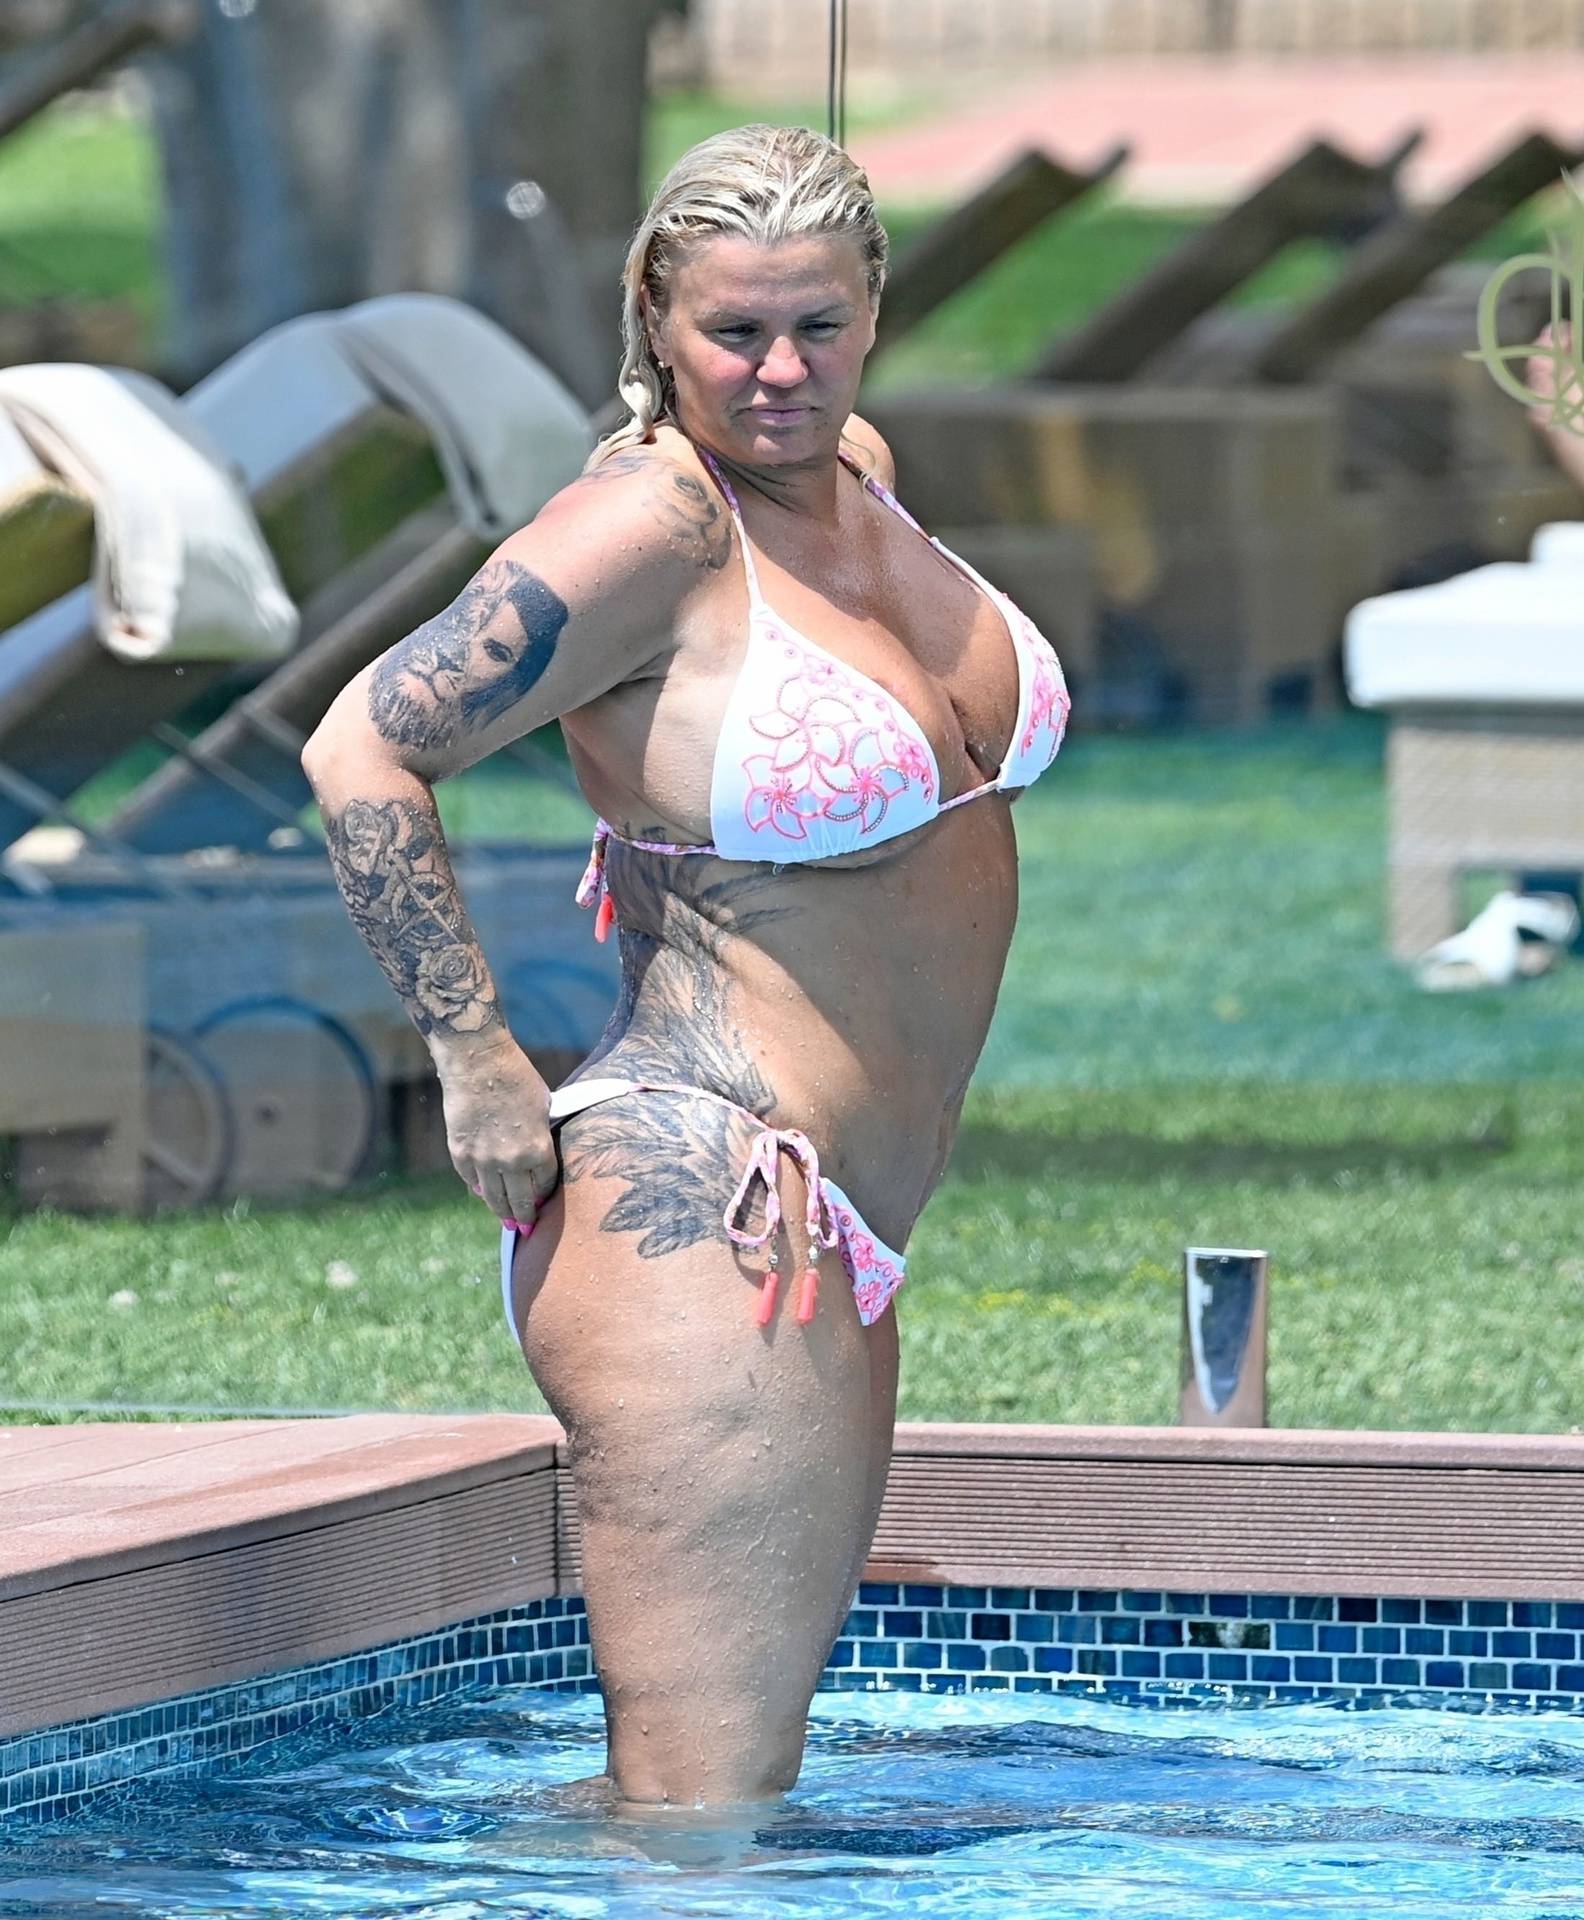 *PREMIUM-EXCLUSIVE* MUST CALL FOR PRICING BEFORE USAGE  - The former Atomic Kitten star Kerry Katona with her beau Ryan Mahoney enjoy a little fun in the sun during their holidays out in Spain.
*PICTURES TAKEN ON 02/06/2023*